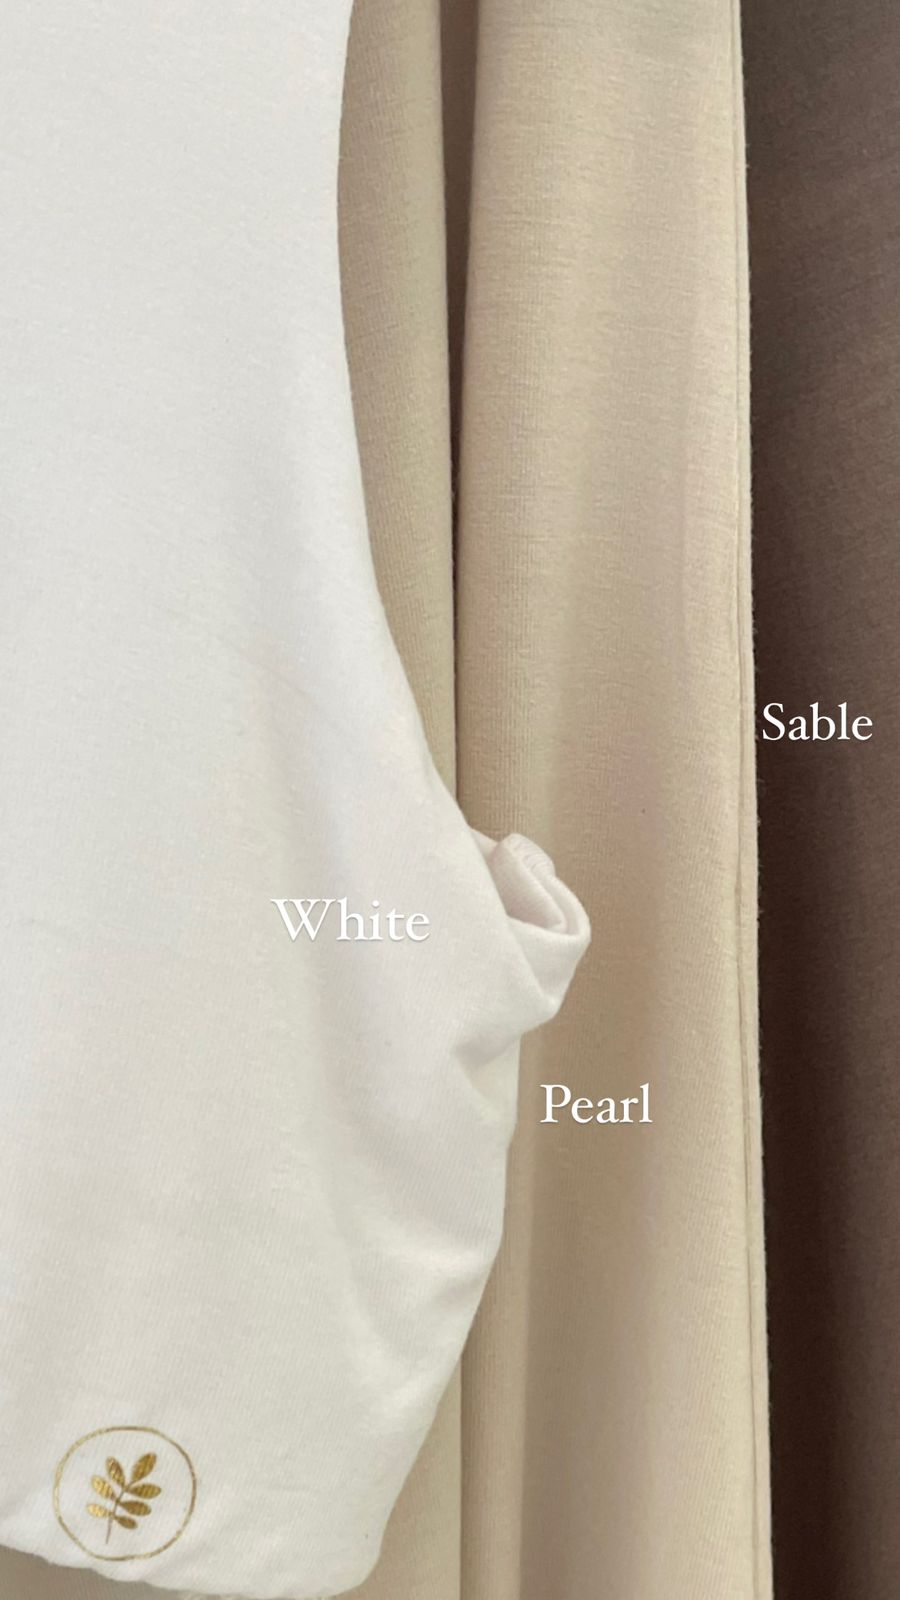 Colour difference between white, pearl and sable